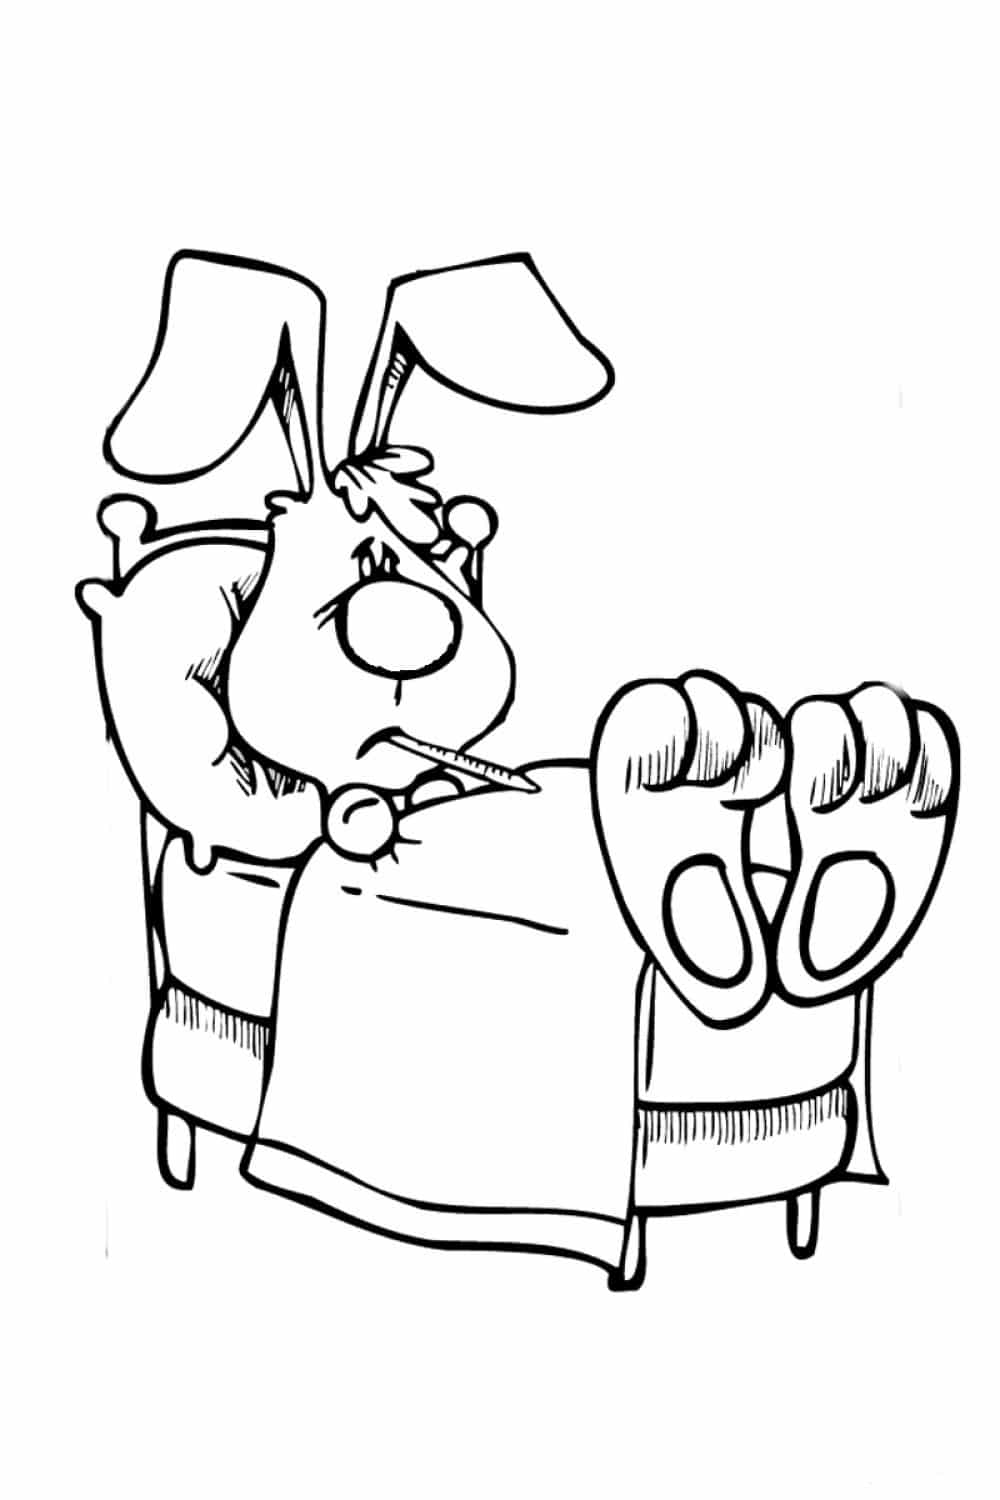 Sick rabbit lying in bed coloring page